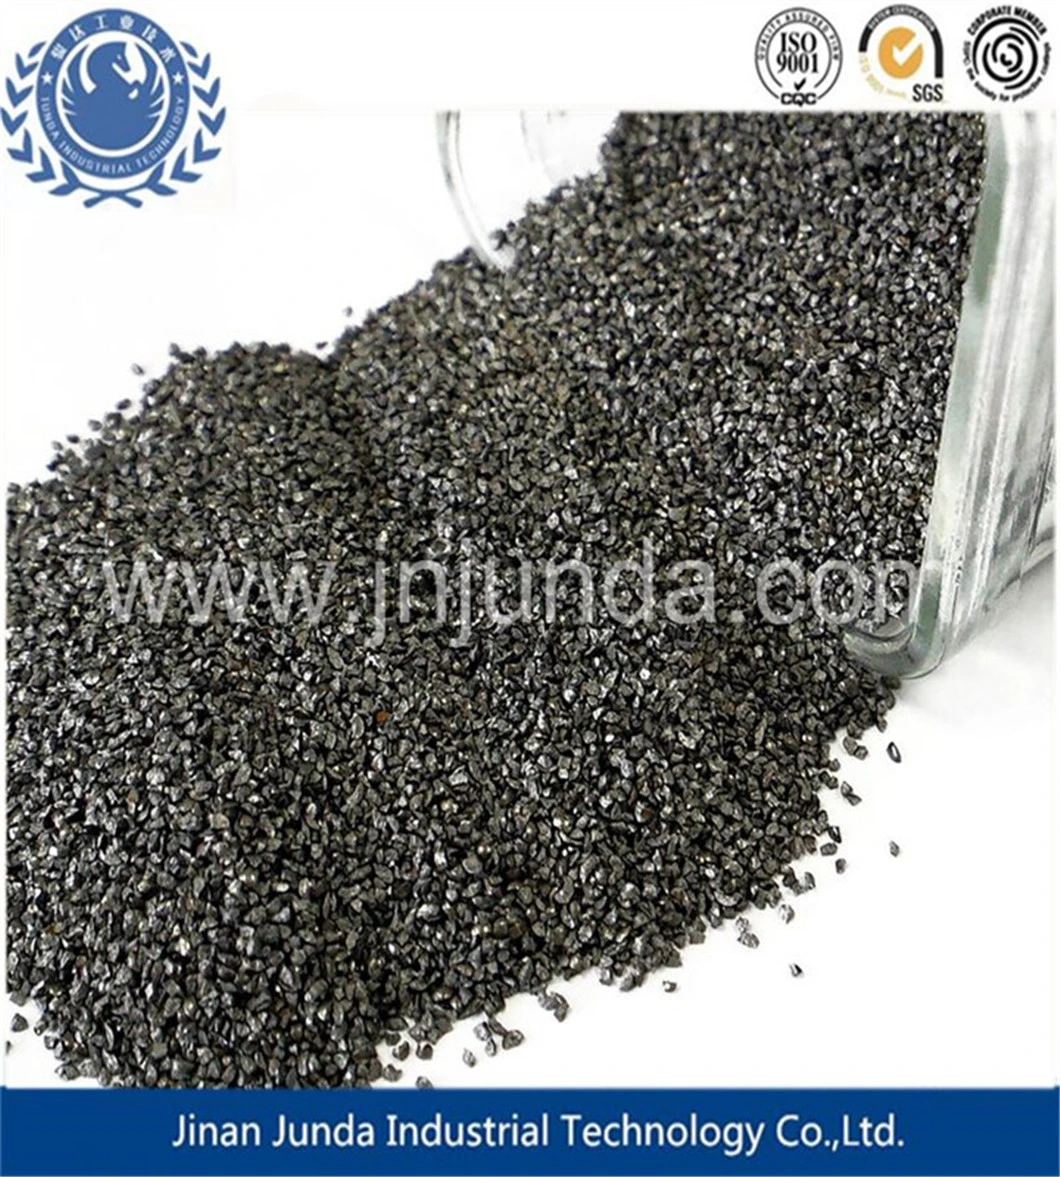 Abrasive/Steel Grit/Cut Wire Shot/Stainless Cut Wire Shot/Stainless Steel Wire for Sandblasting